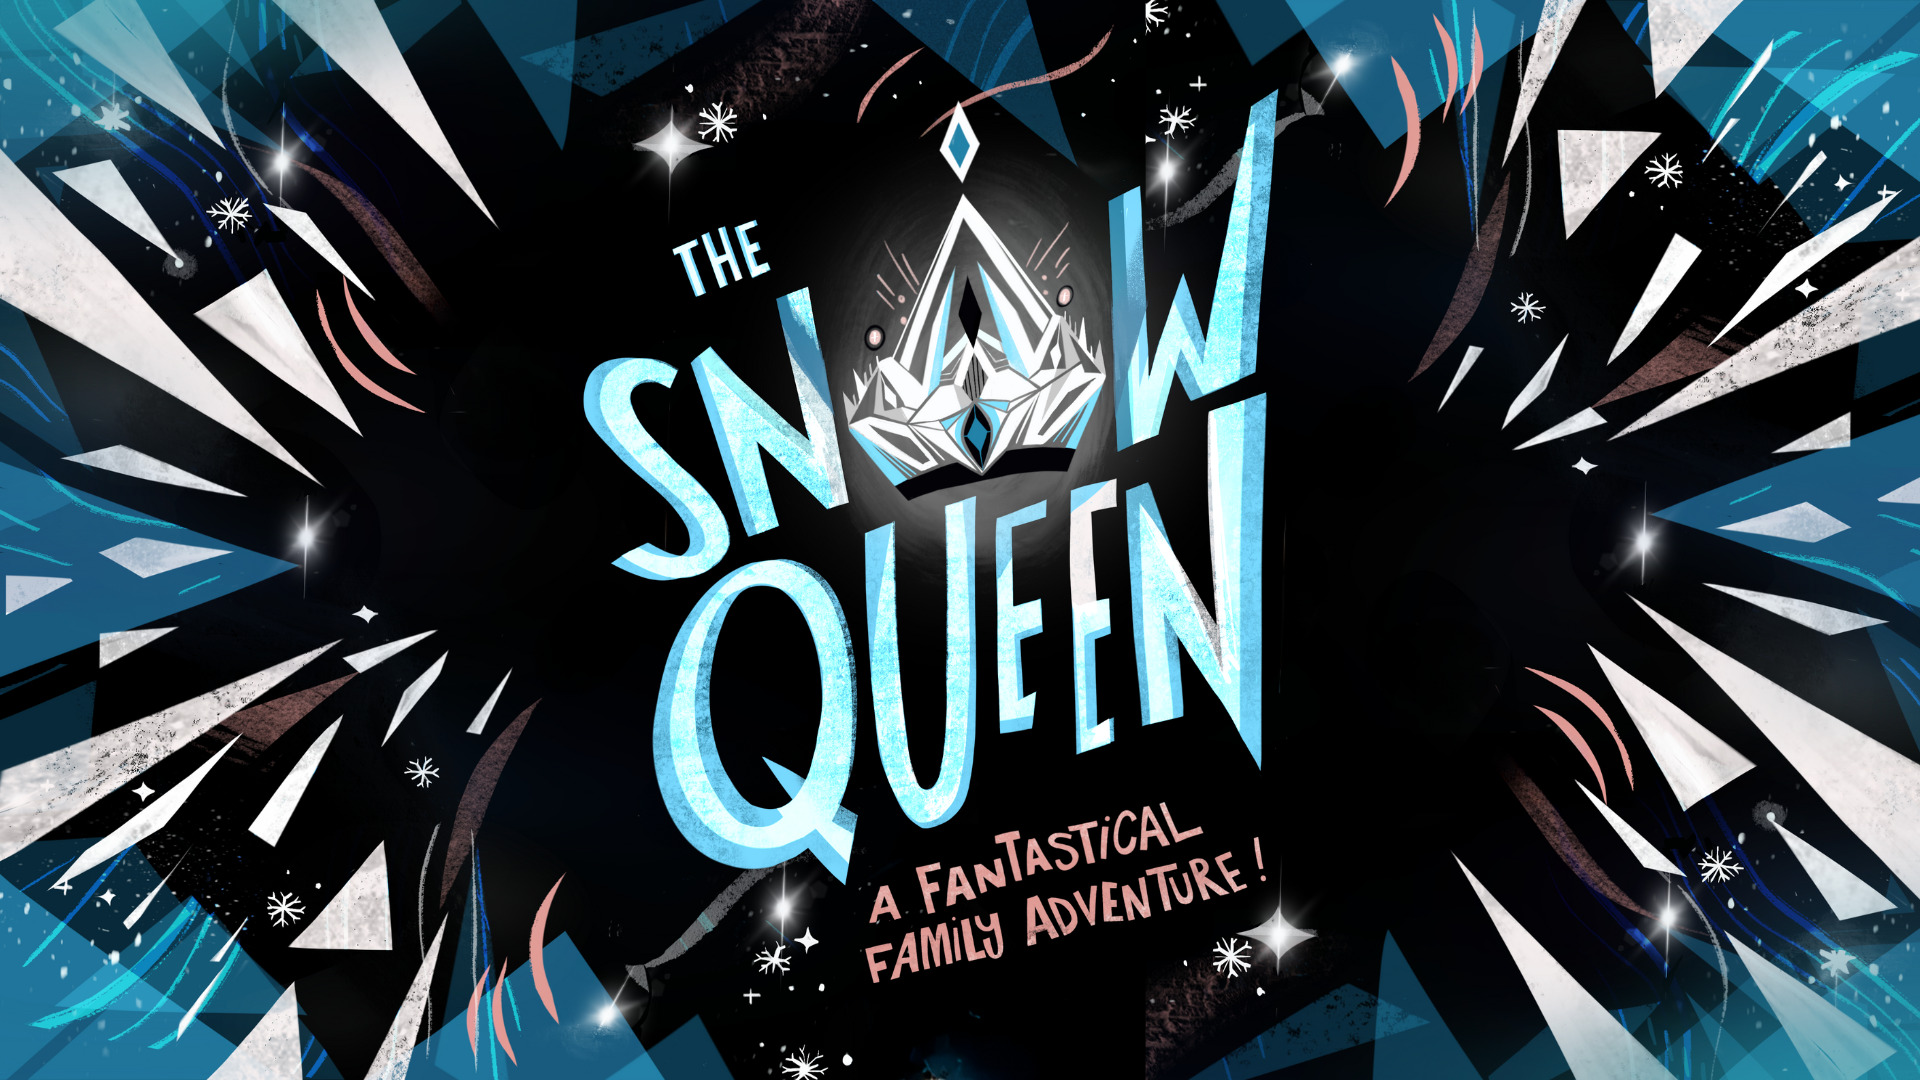 The Snow Queen at Polka Theatre